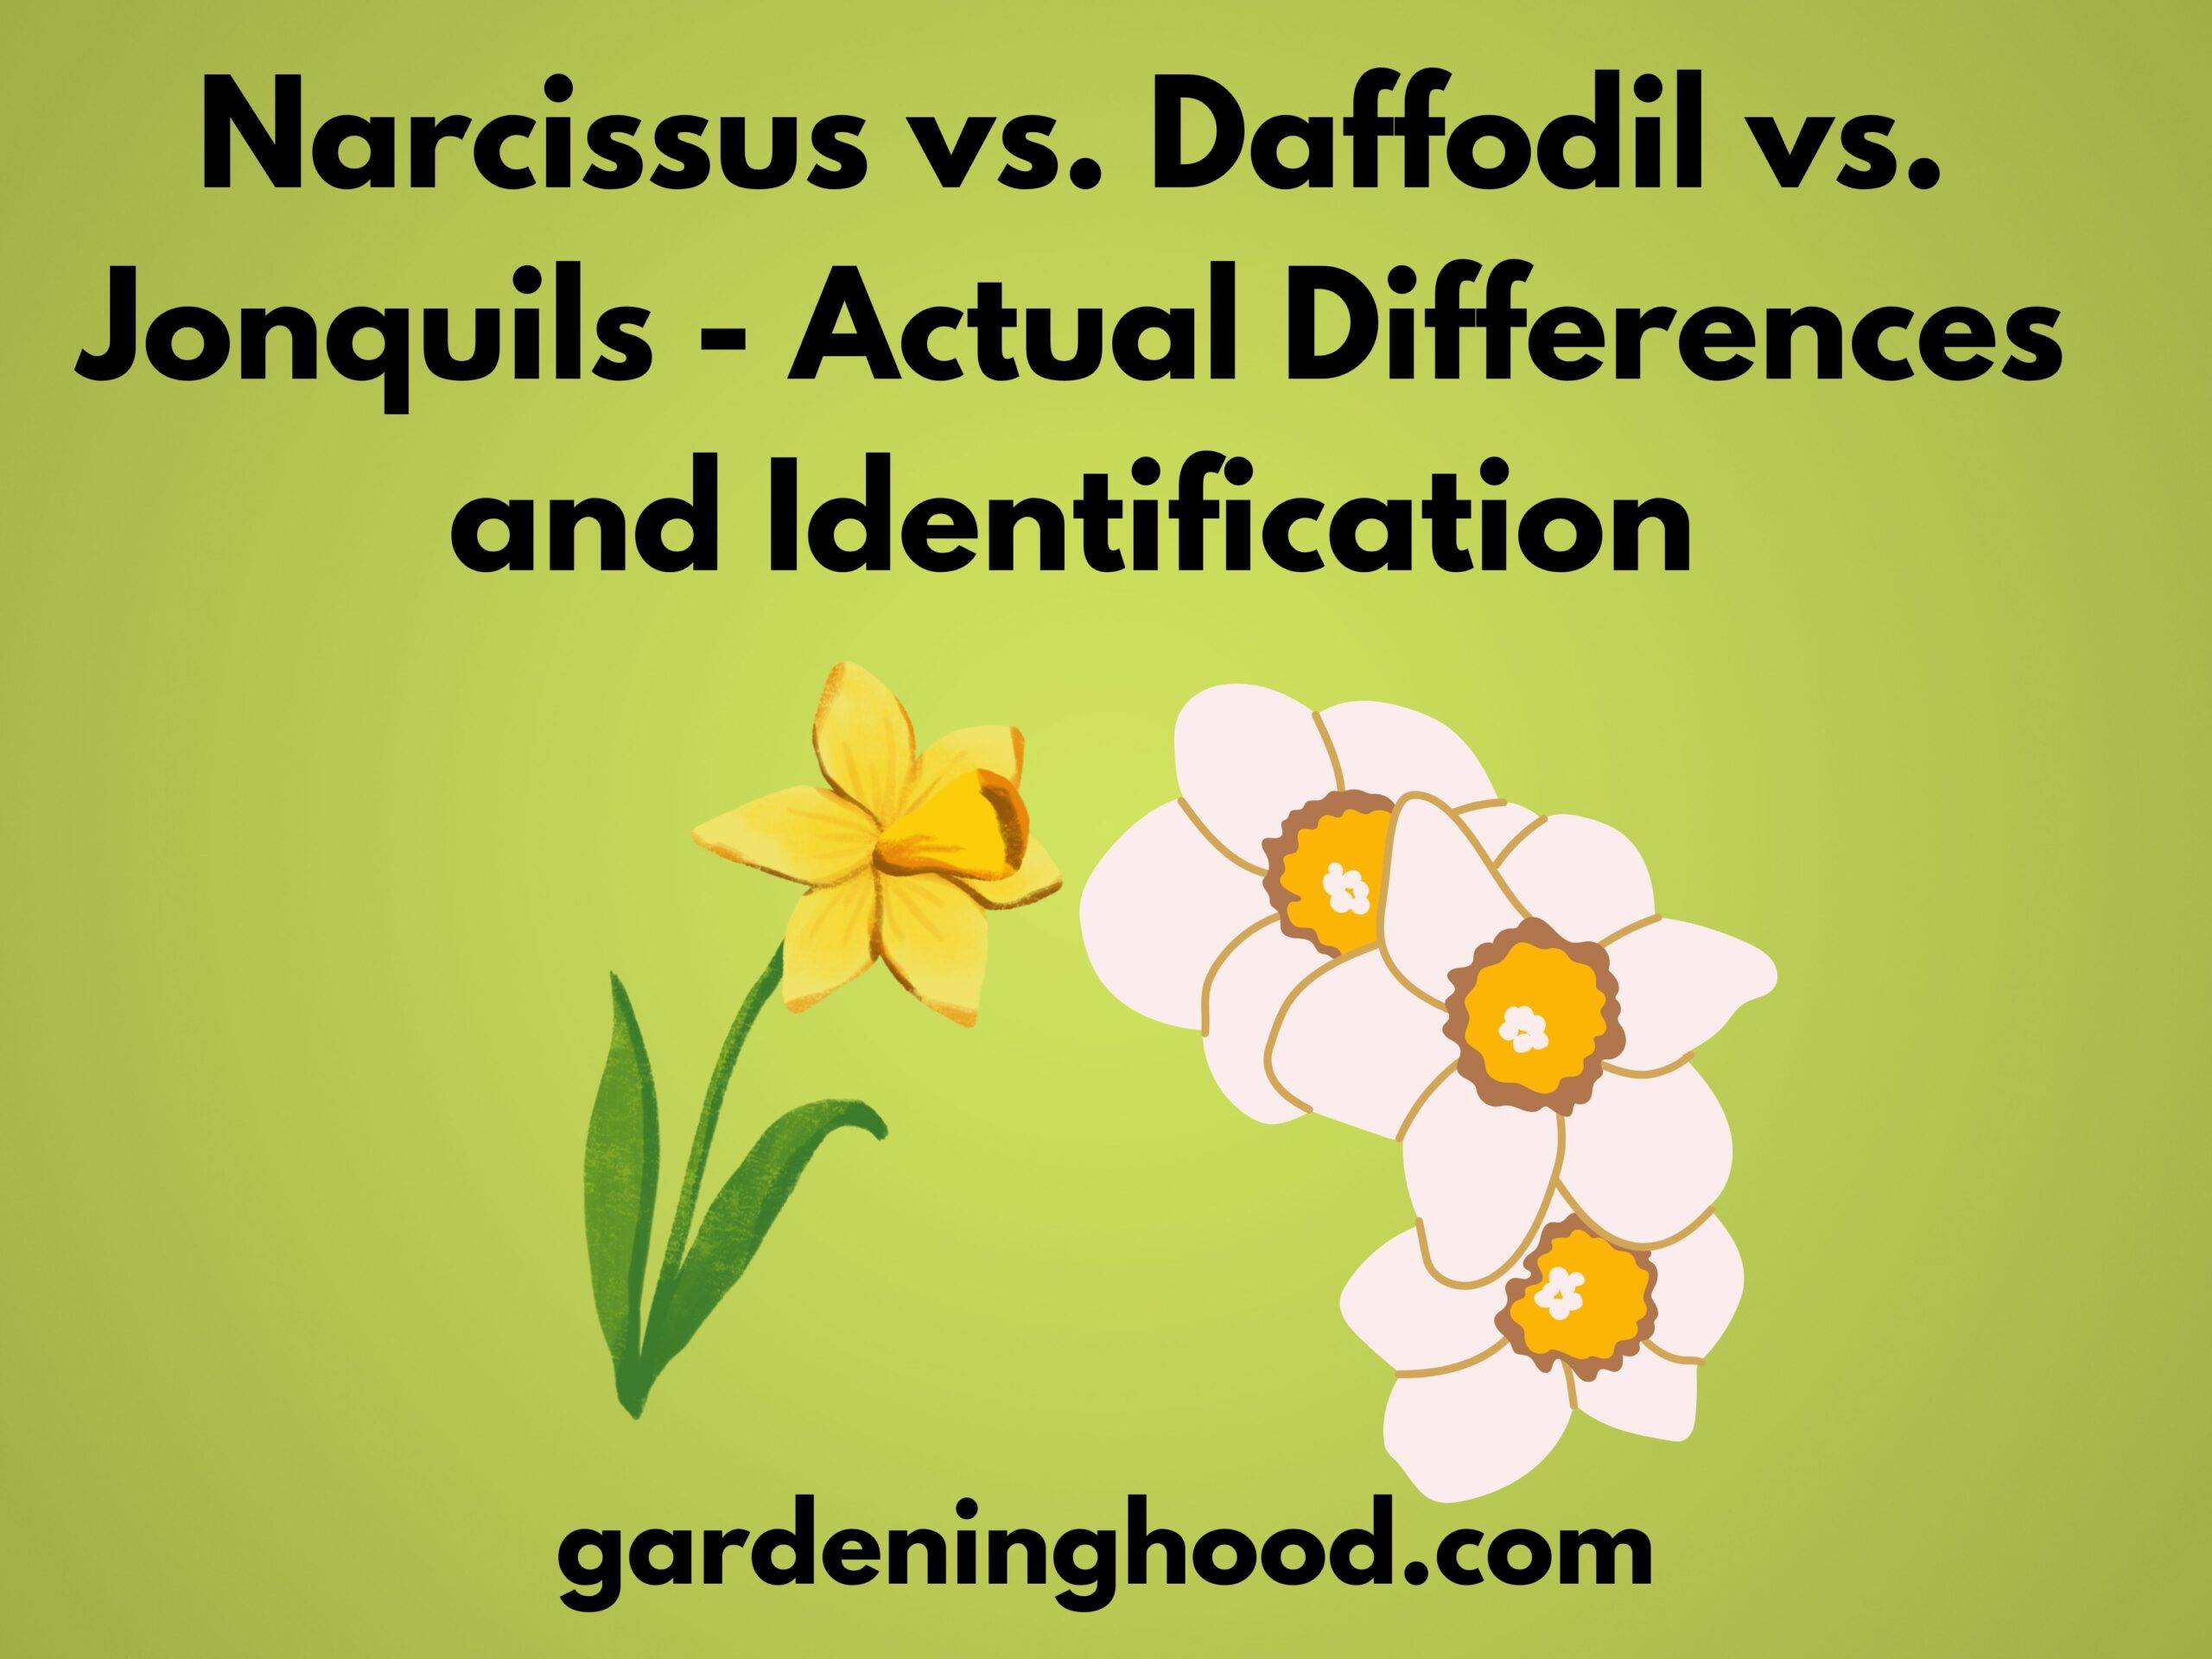 Narcissus vs. Daffodil vs. Jonquils - Actual Differences and Identification